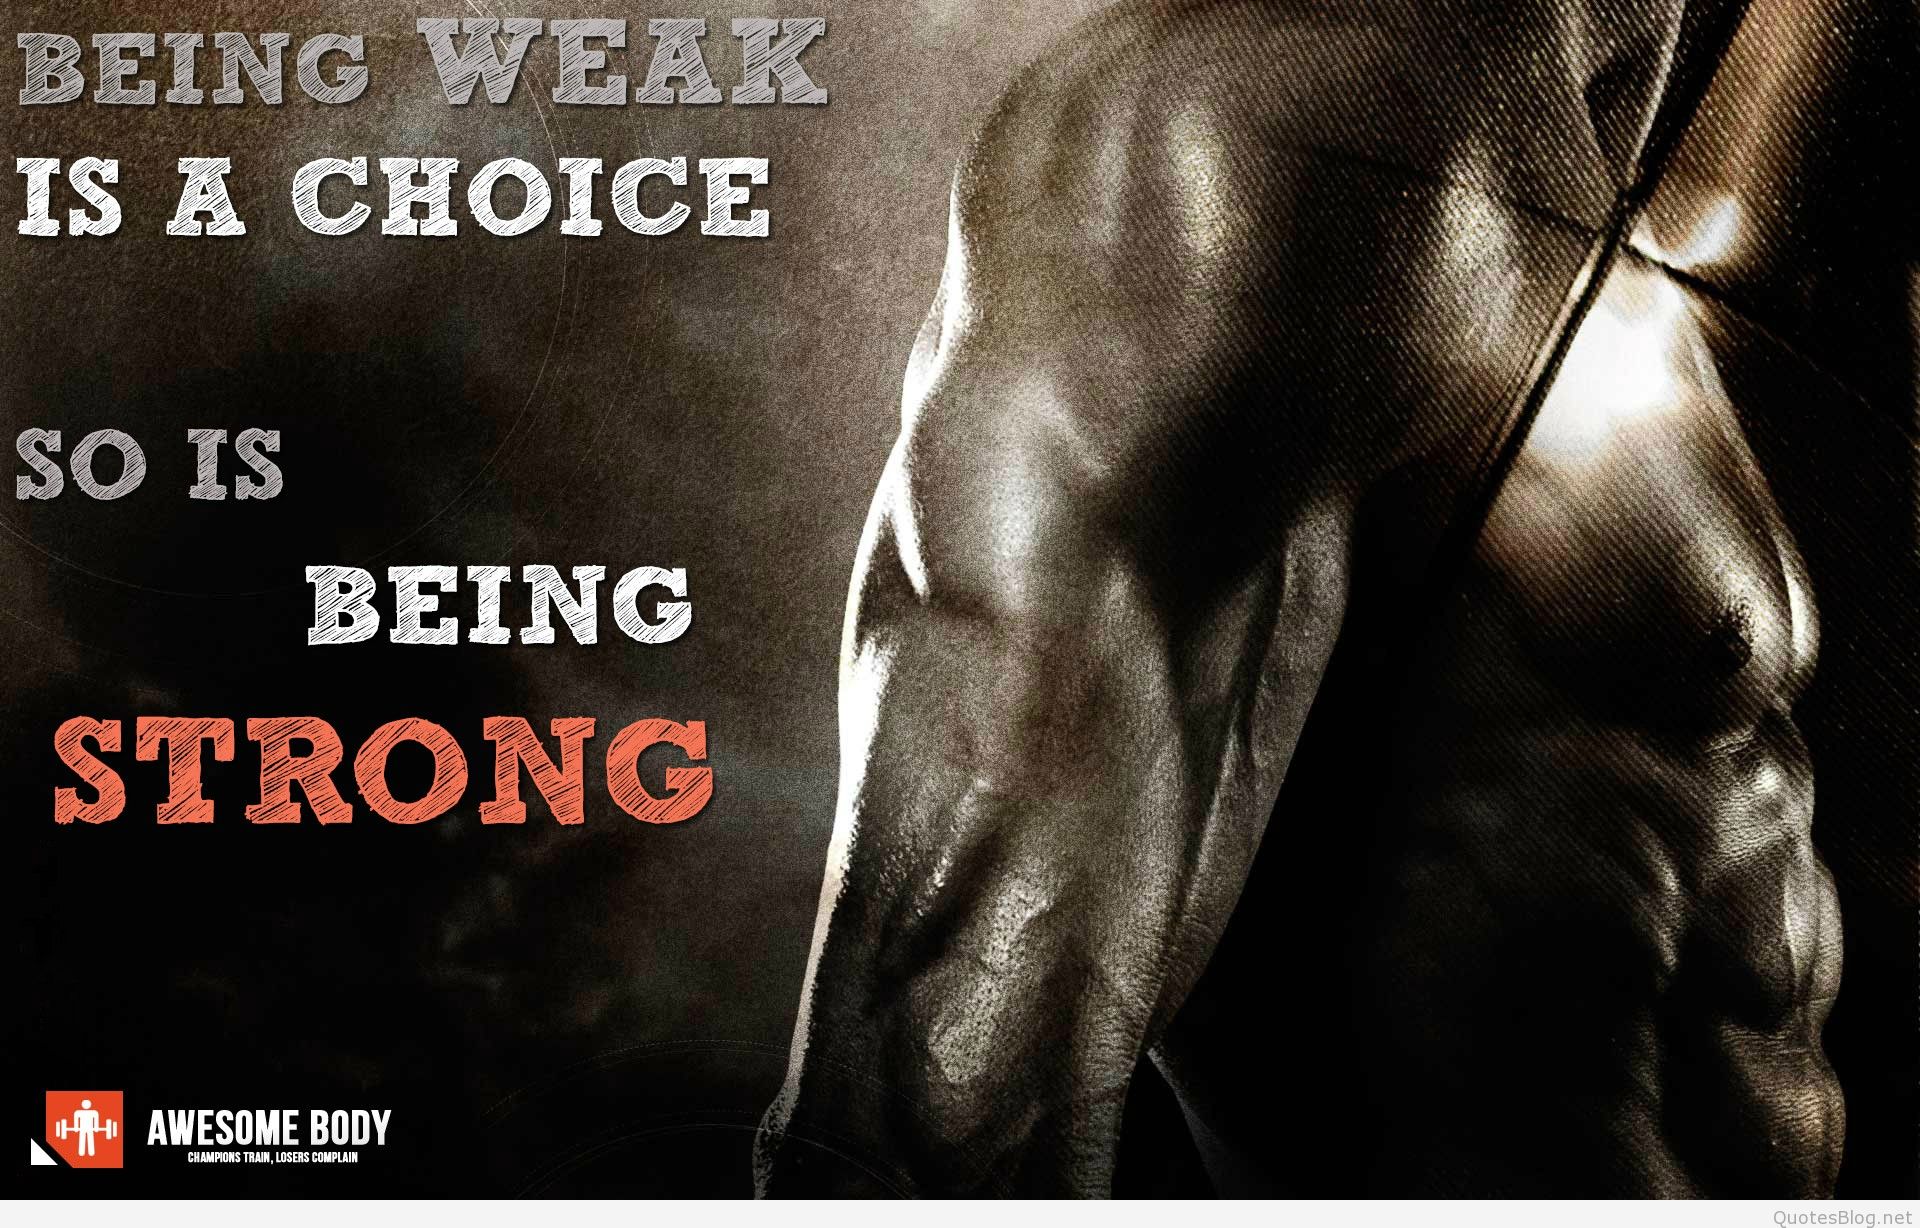 bodybuilding motivation wallpaper,bodybuilding,muscle,arm,physical fitness,joint